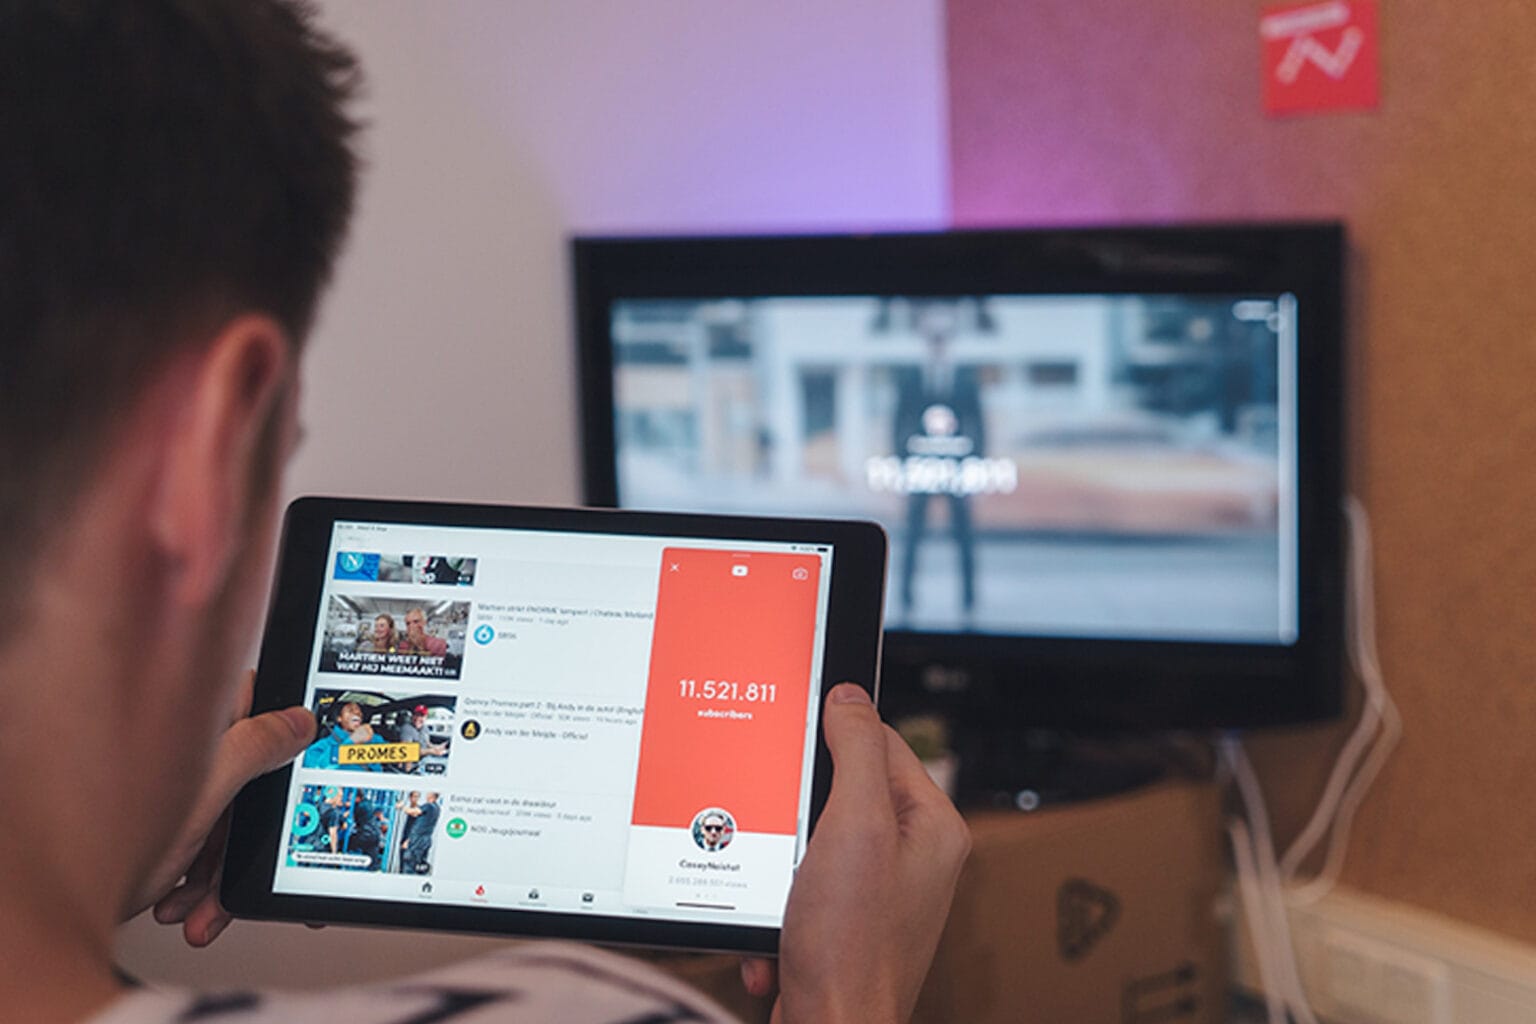 Get this YouTube masterclass on sale for less than $50 today.